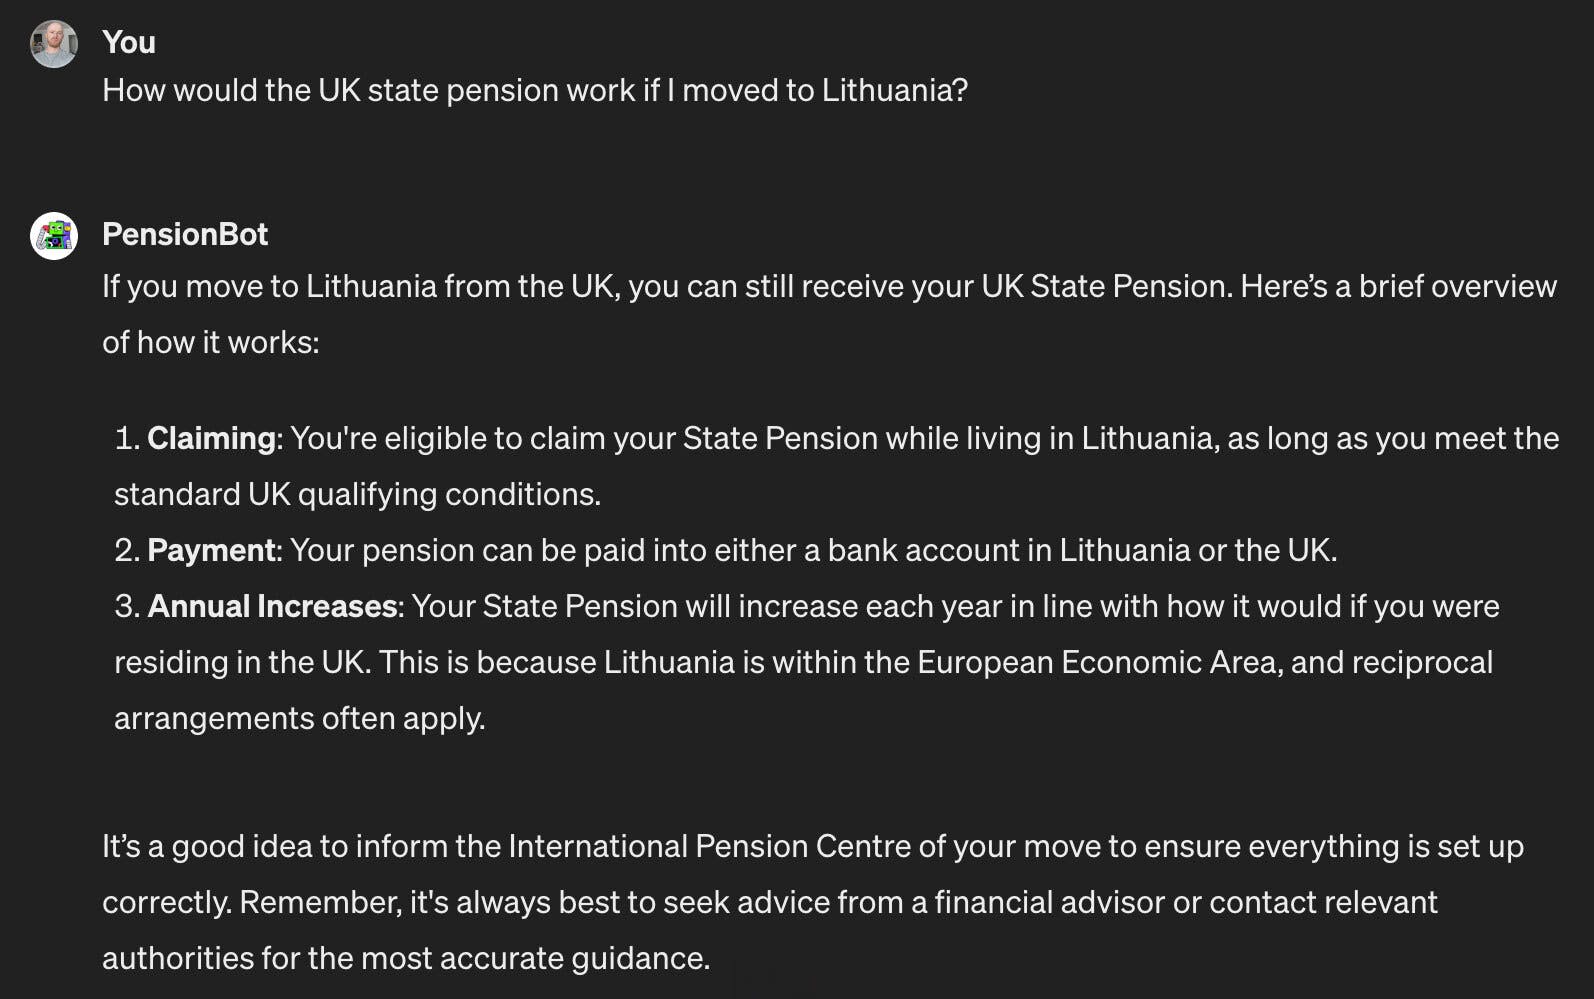 Question asked: How would a UK state pension work if I live in Lithuania? 

Answer from PensionBot: If you live in Lithuania but have worked in the UK and built up some UK State Pension, you can still receive your UK State Pension while living abroad. Some key things to consider are: 1. Qualification, 2. Claiming, 3. Payments, 4. Annual Increases